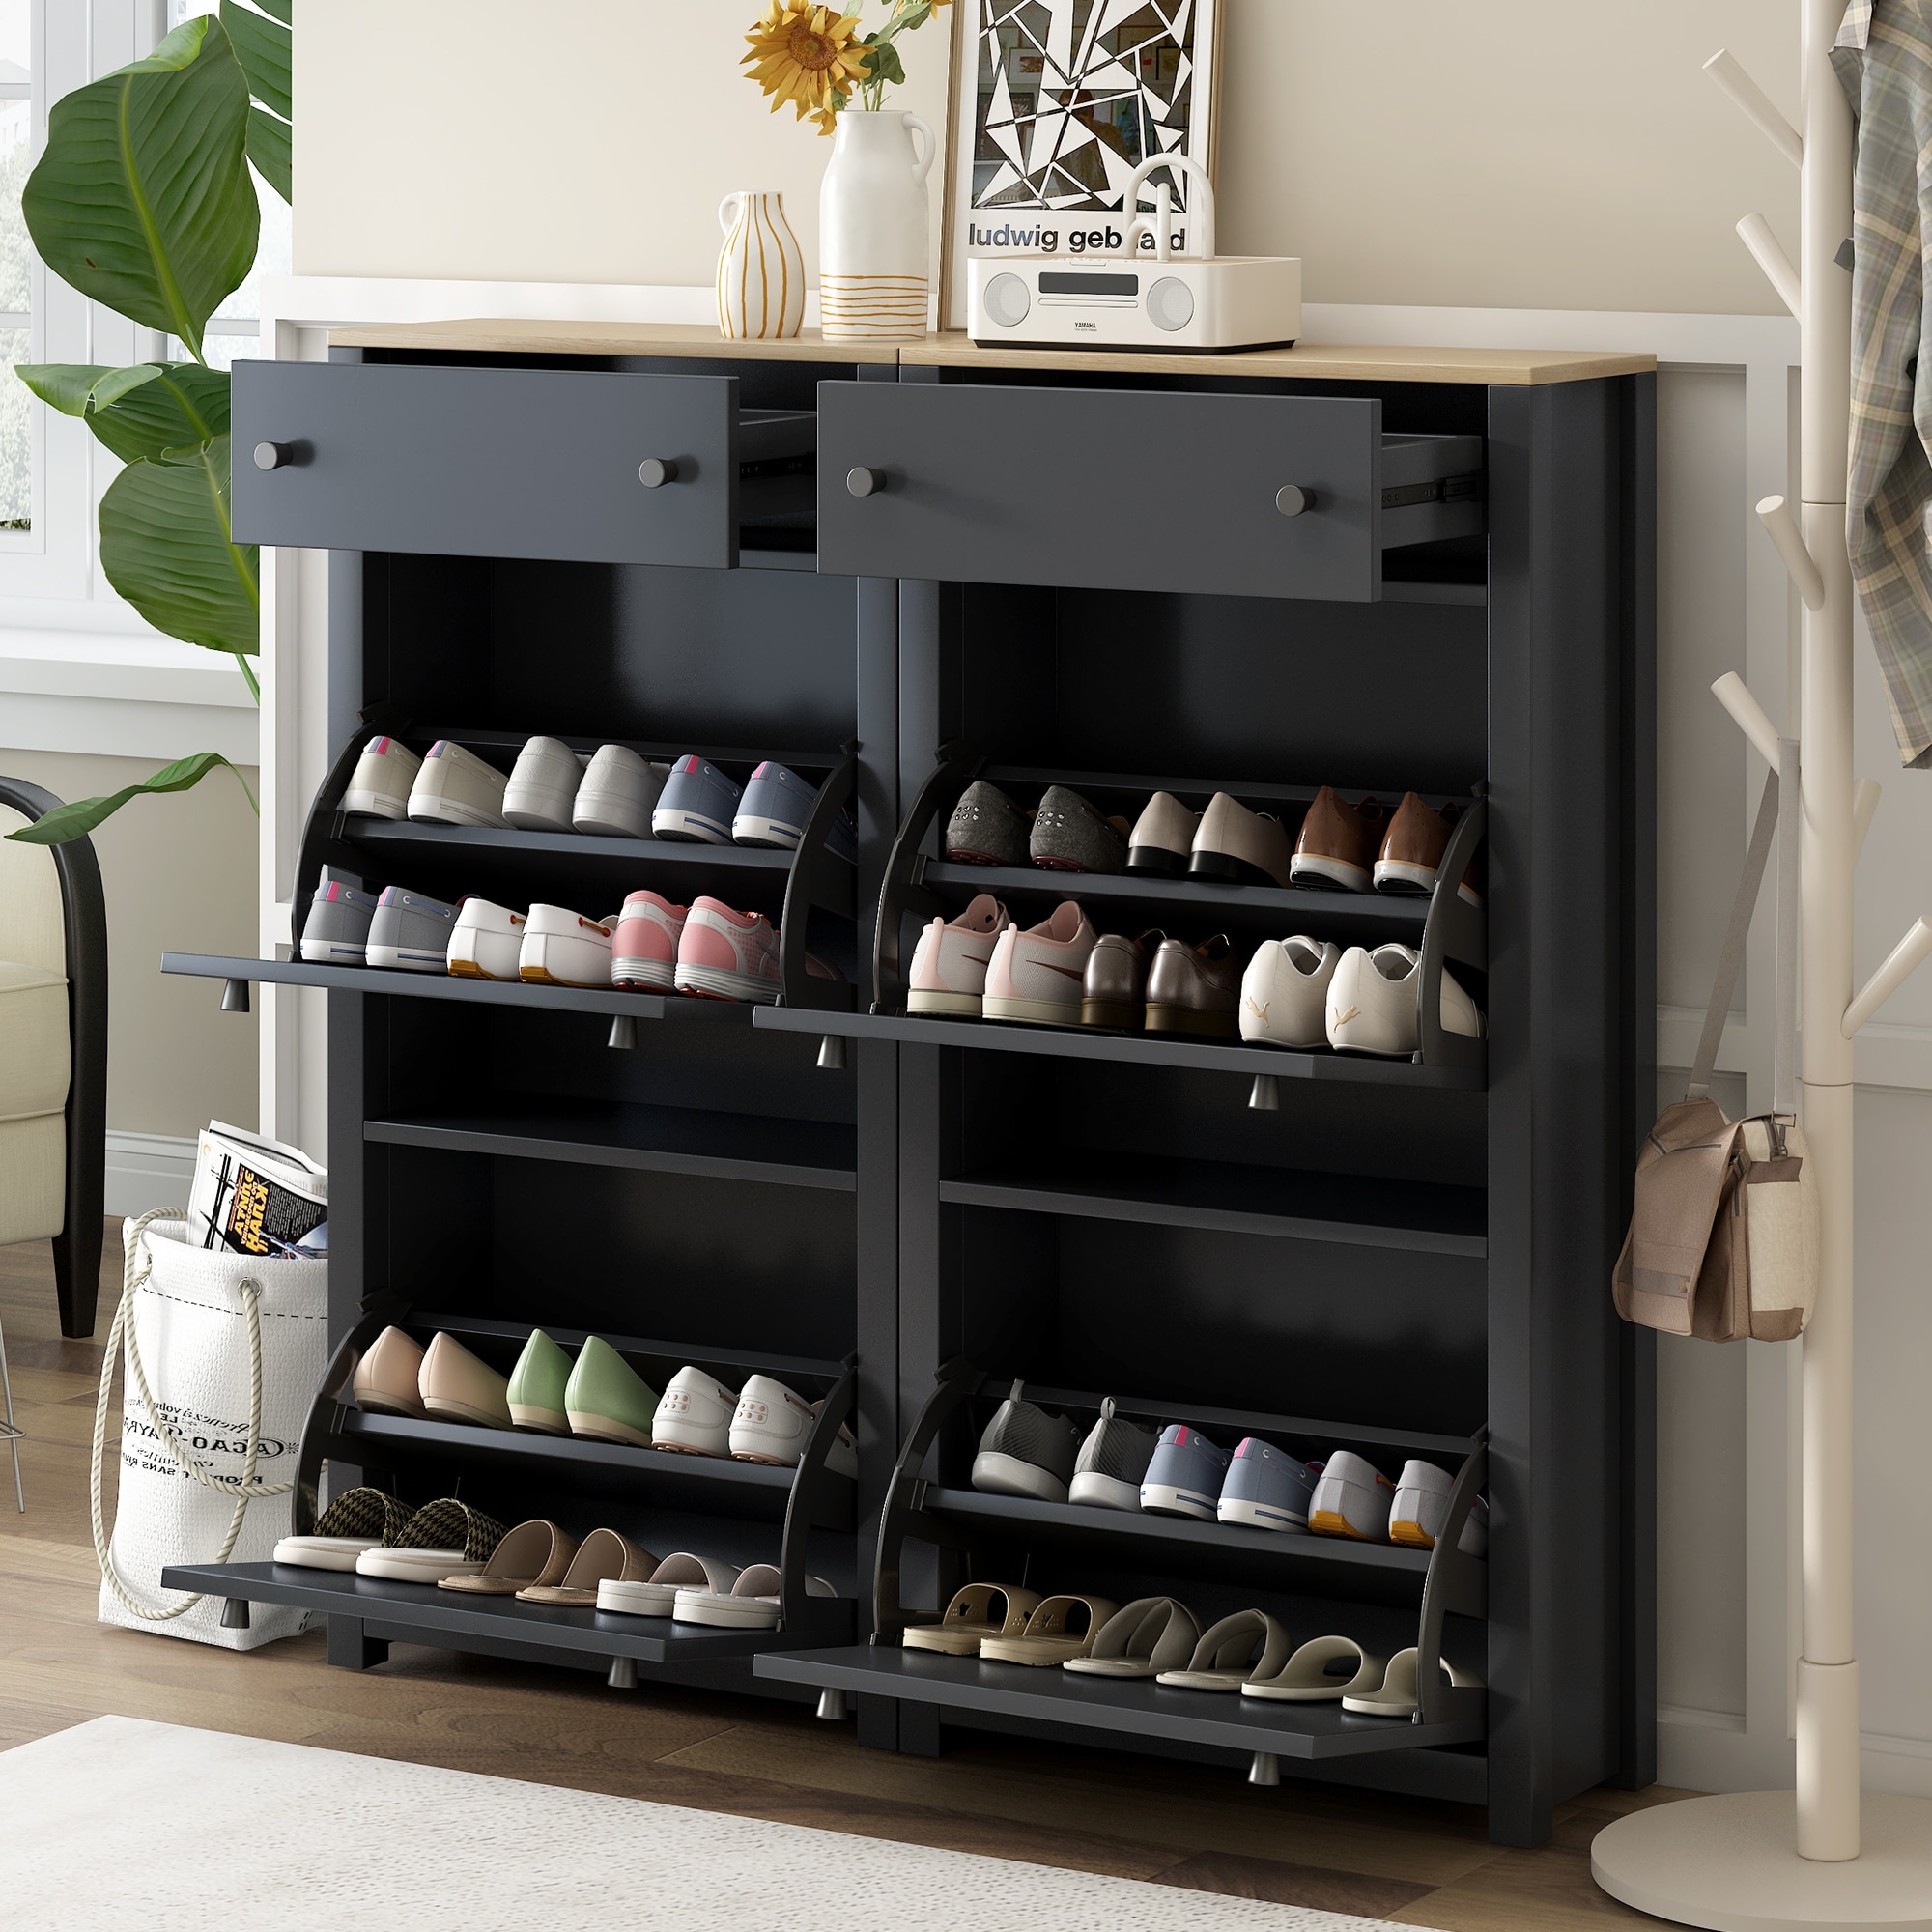 https://ak1.ostkcdn.com/images/products/is/images/direct/5c608b75d9fb9376cfce0bbc71f00bee7c13c1ae/Shoe-Cabinet-with-4-Flip-Drawers%2C-Entryway-Shoe-Storage-Cabinet-with-Adjustable-Panel%2C-Free-Standing-Shoe-Rack-Storage-Organizer.jpg